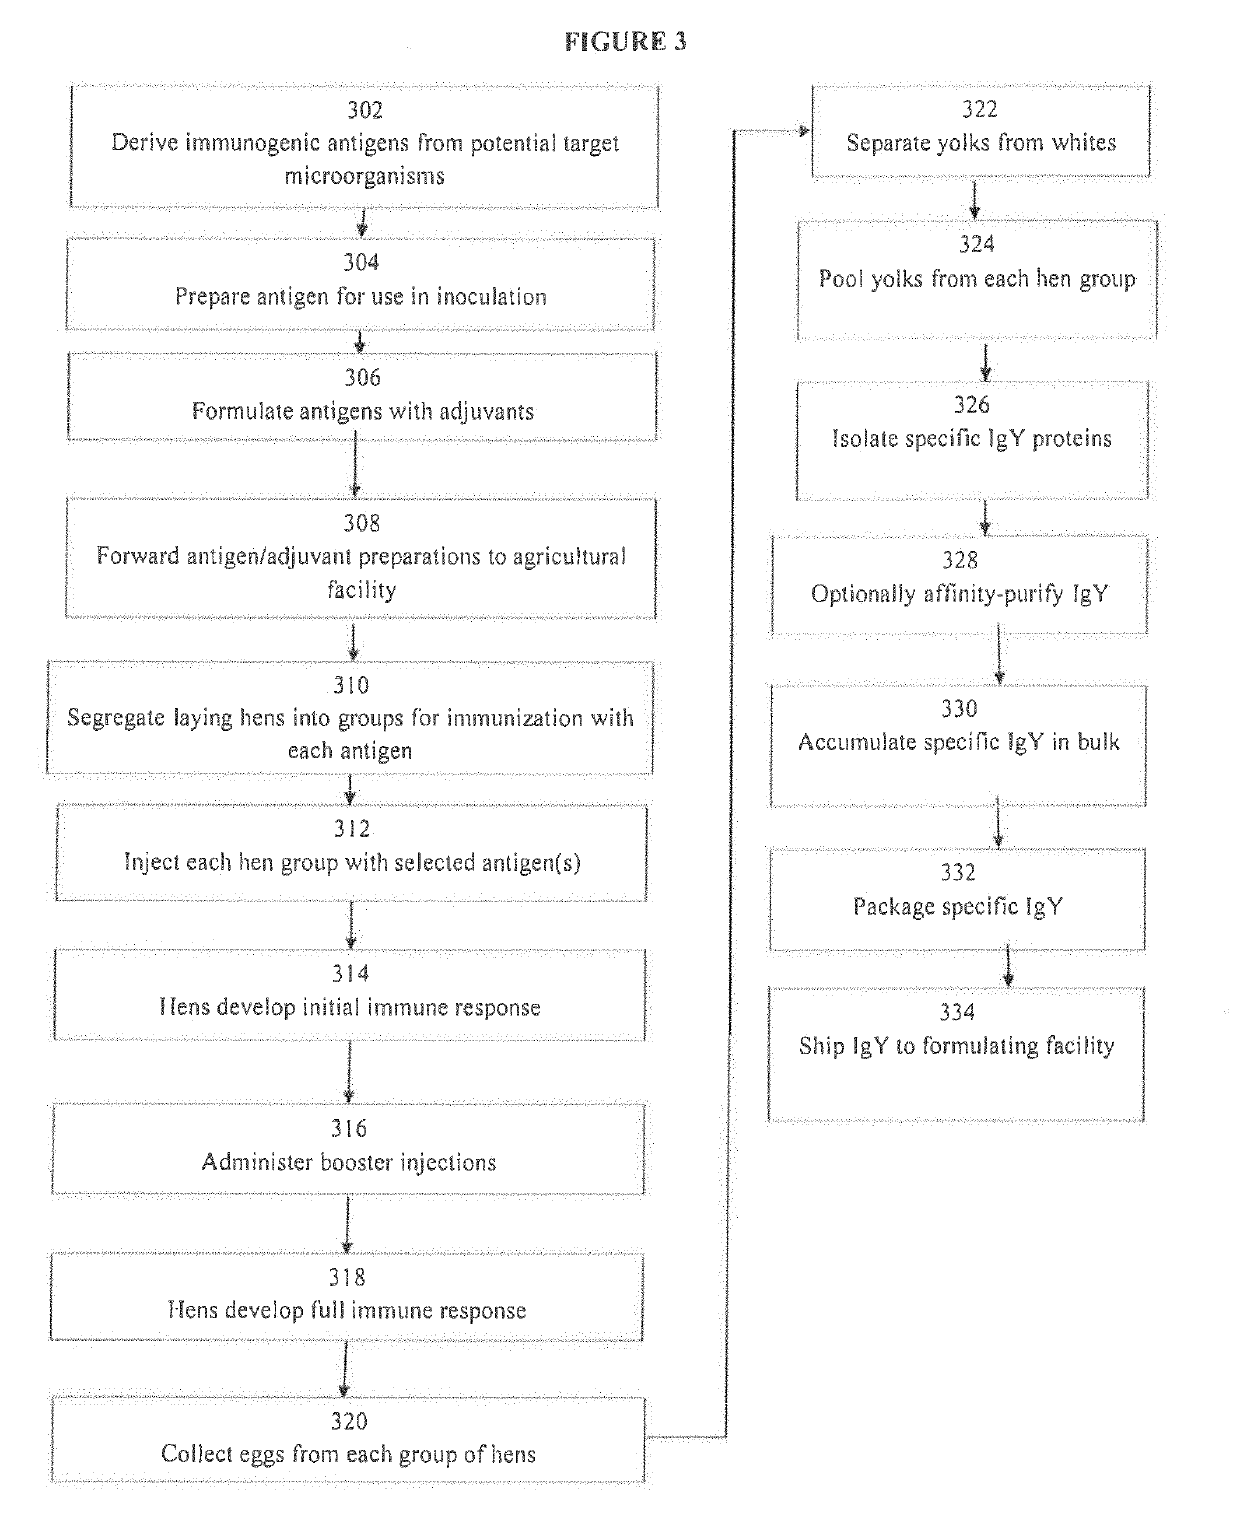 Systems and methods for altering microbiome to reduce disease risk and manifestations of disease